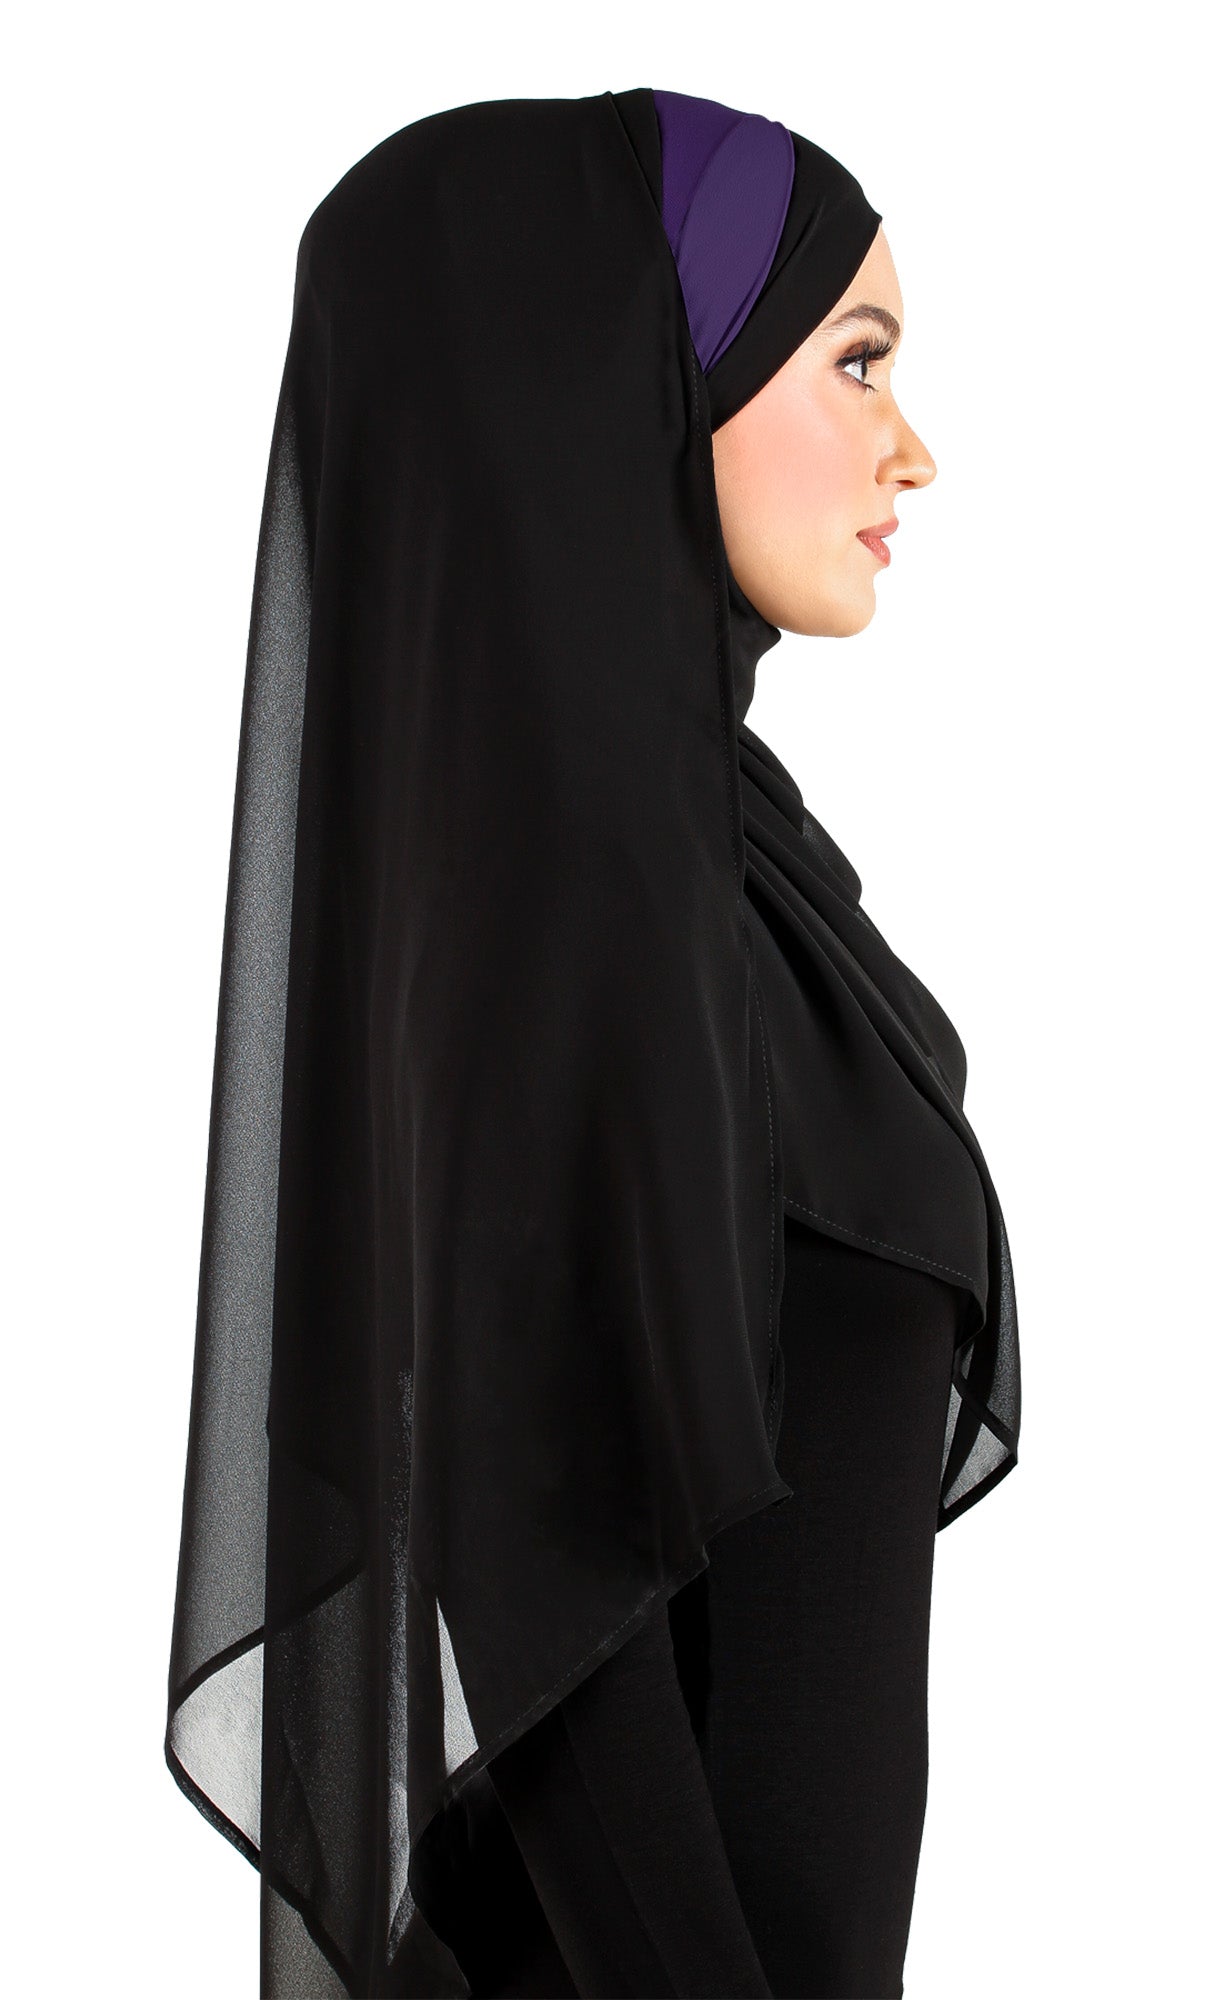 side view of Chiffon Wrap Hijab with caplet and sashes that tie back to secure hijab black with purple accent on the caplet